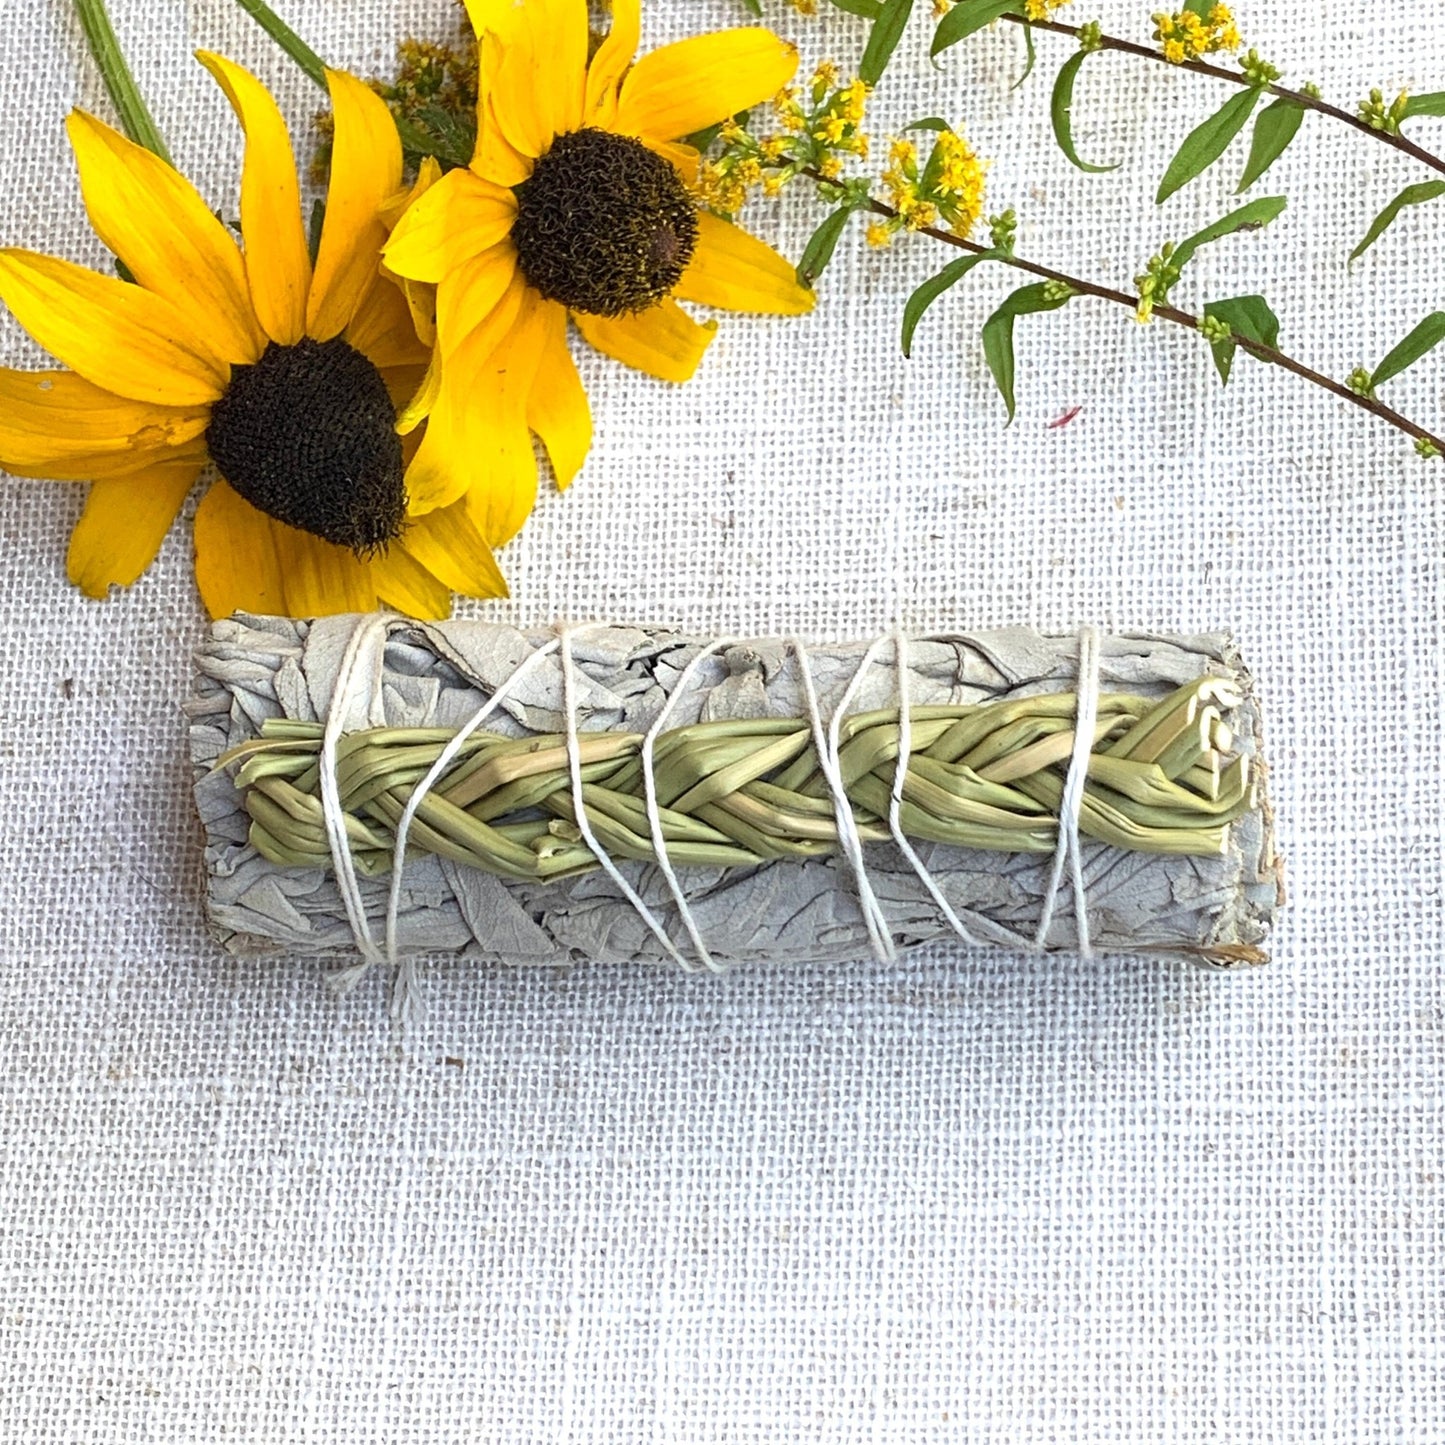 Braided Sweetgrass and Sage Smudge Stick - Coral and Vine Co